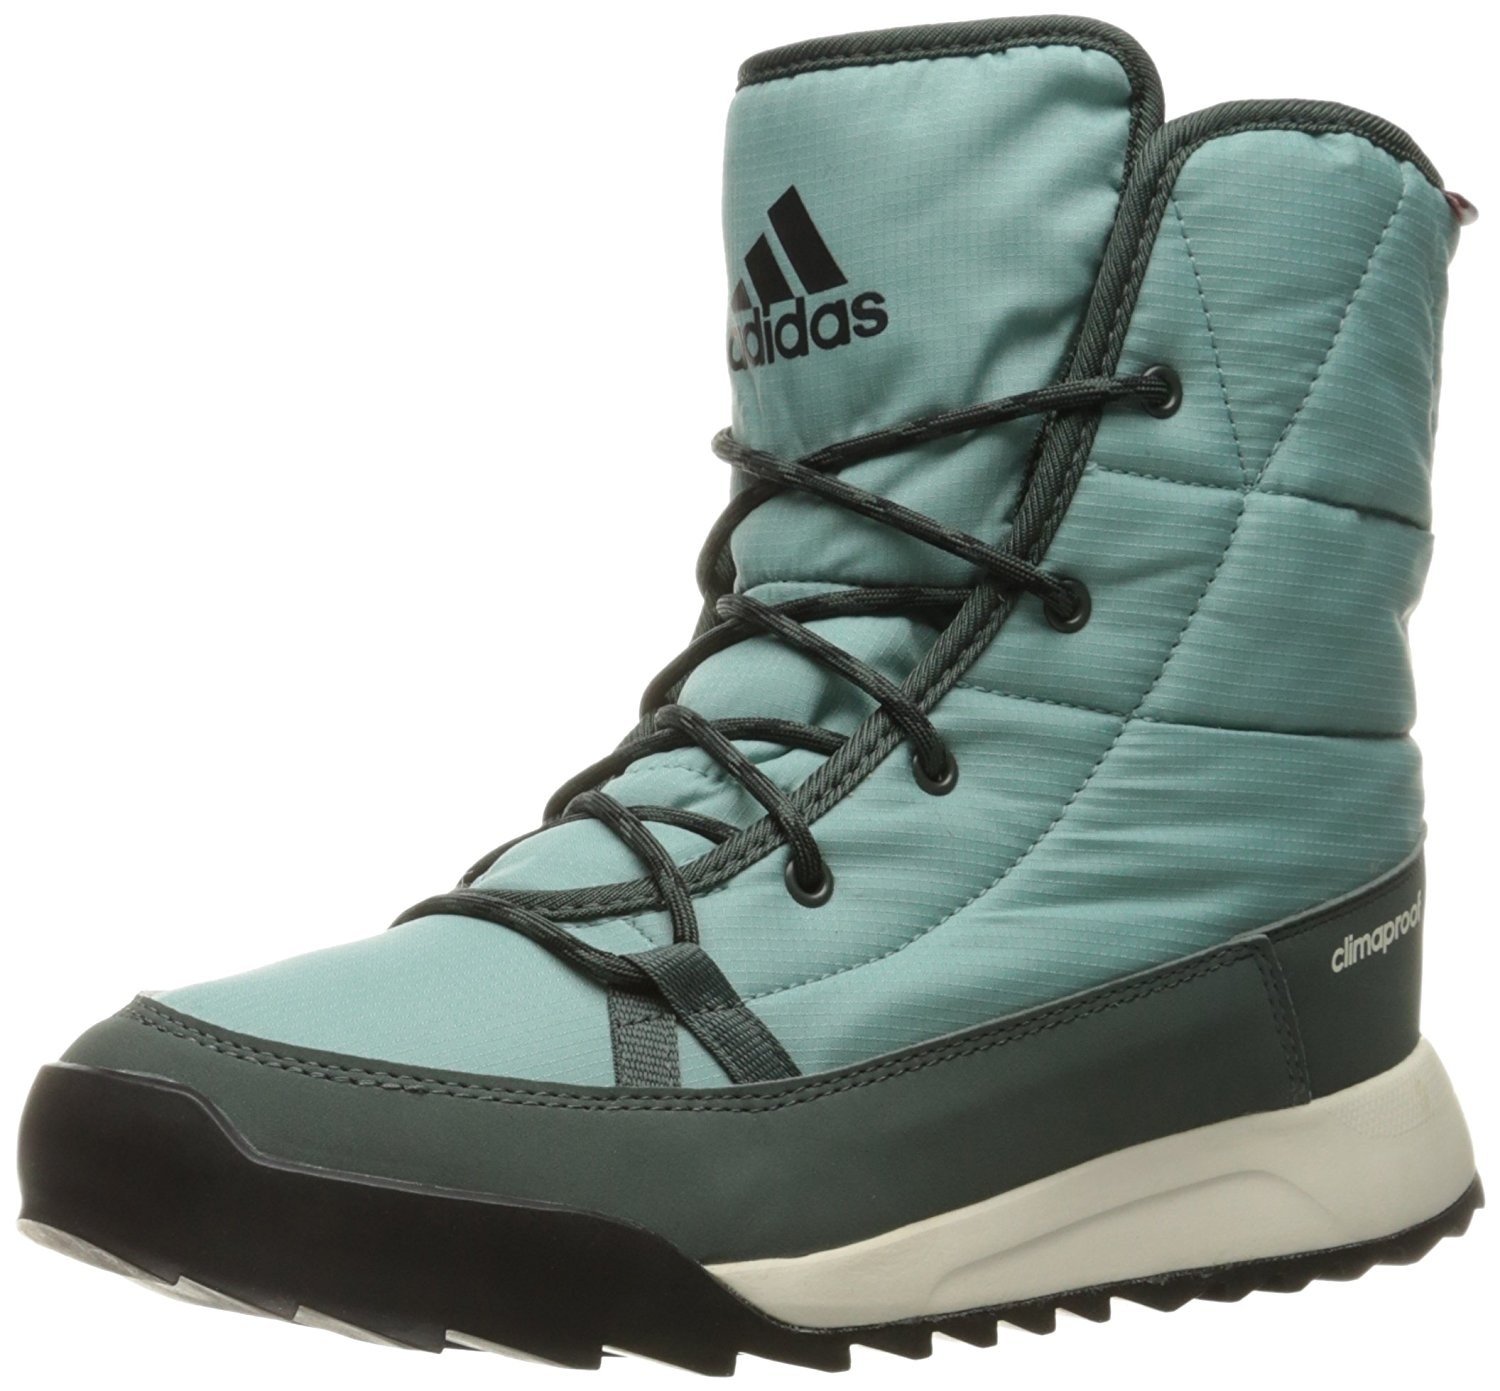 21 Of The Best Snow Boots You Can Get On Amazon